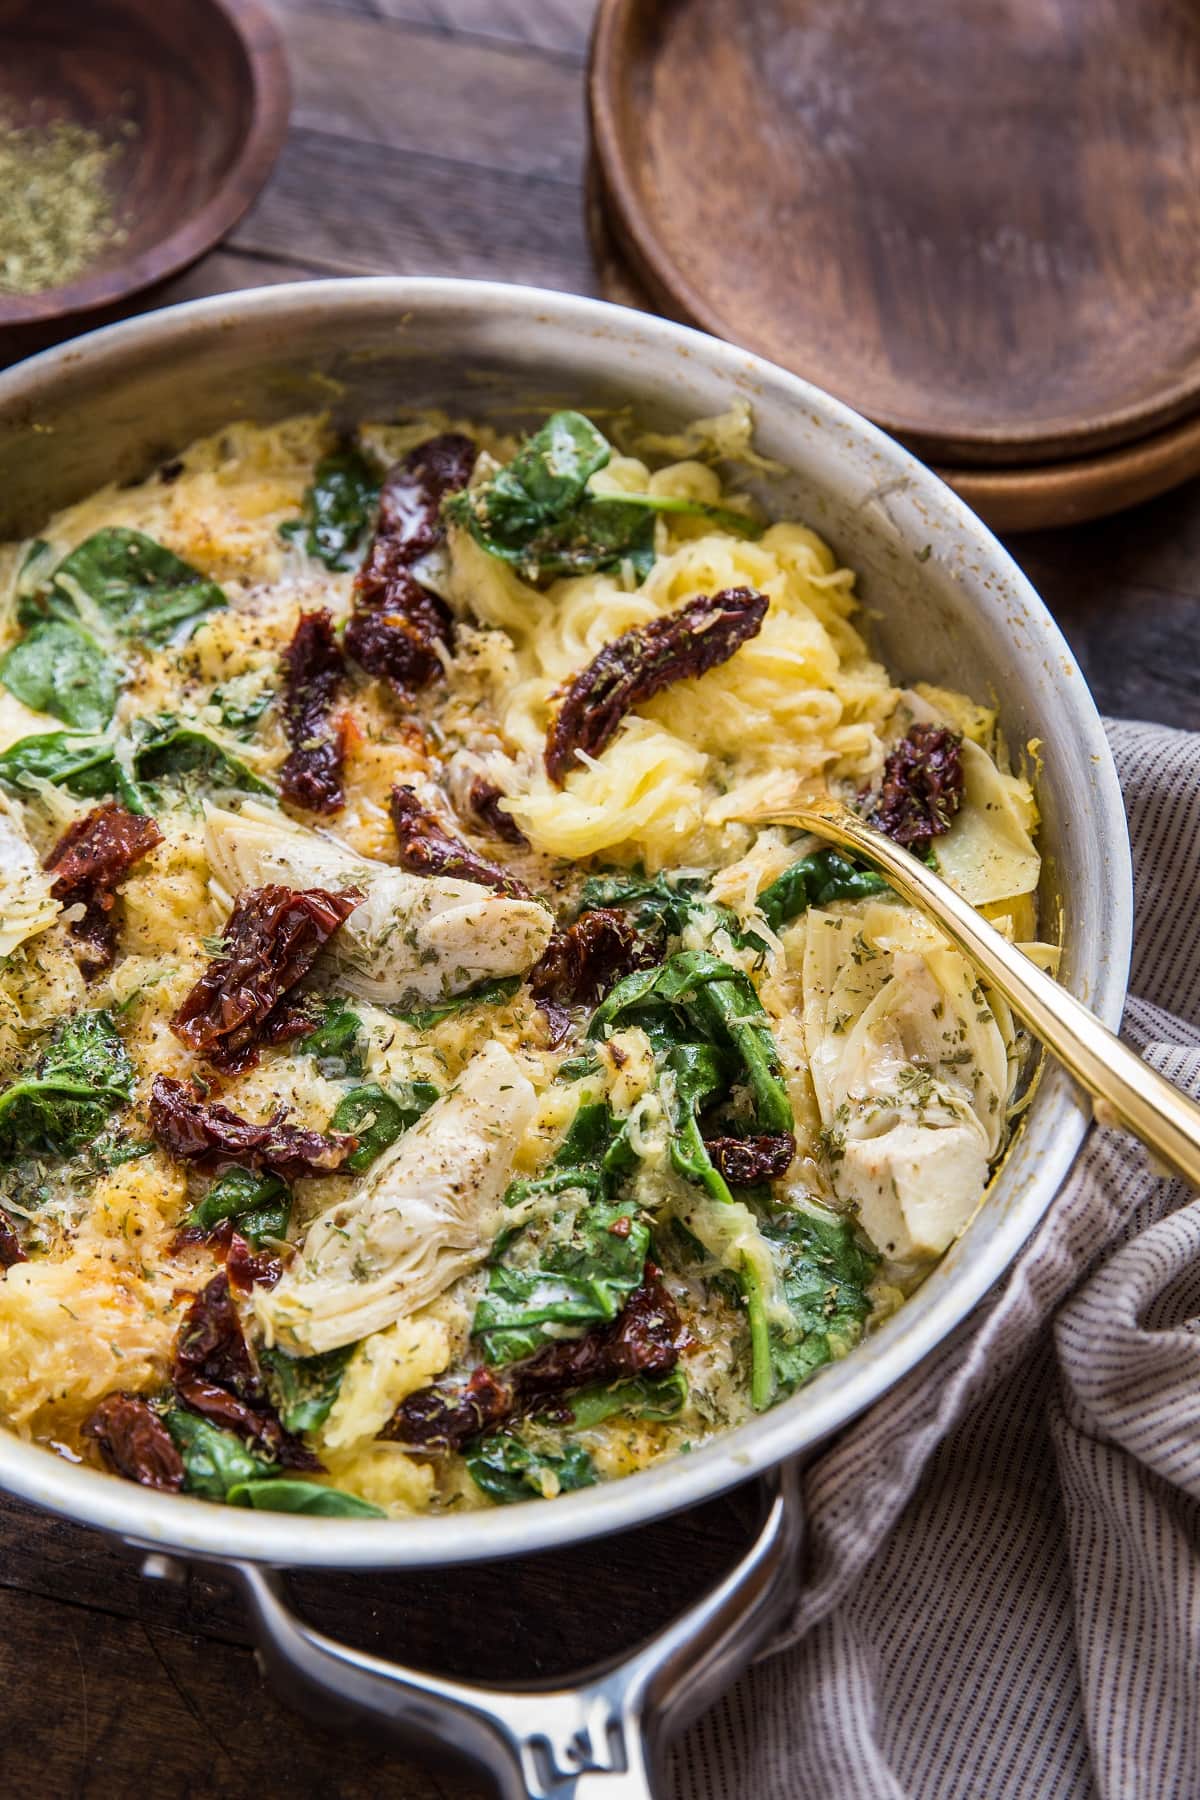 Vegan Creamy Tuscan Spaghetti Squash with Sun-Dried Tomatoes and Spinach - paleo, low-carb, keto healthy side dish or entree